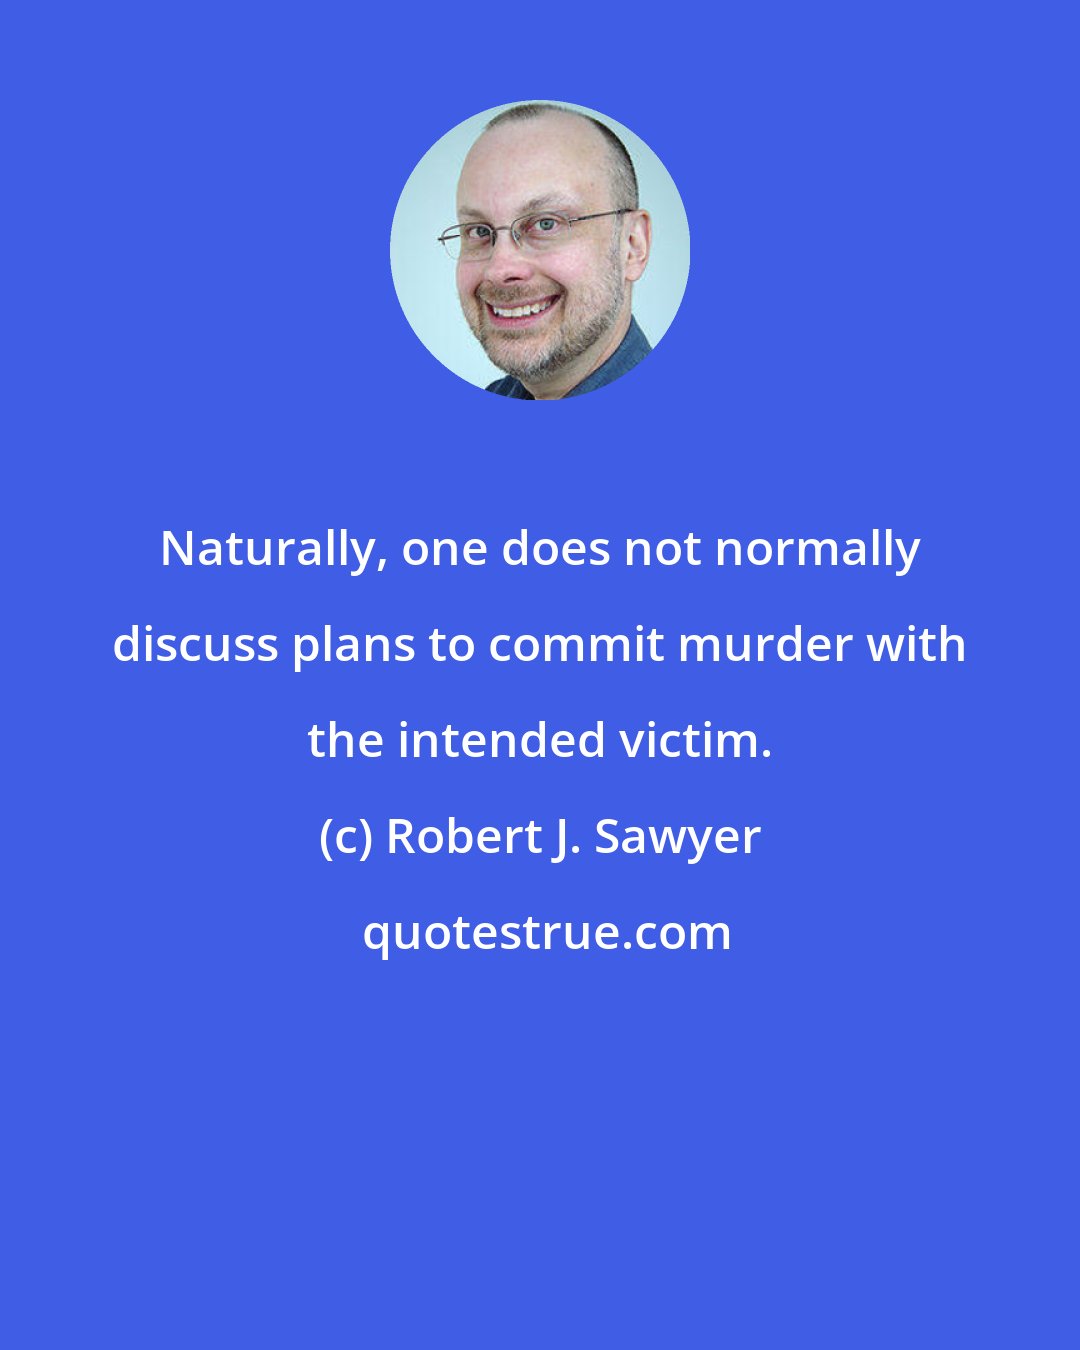 Robert J. Sawyer: Naturally, one does not normally discuss plans to commit murder with the intended victim.